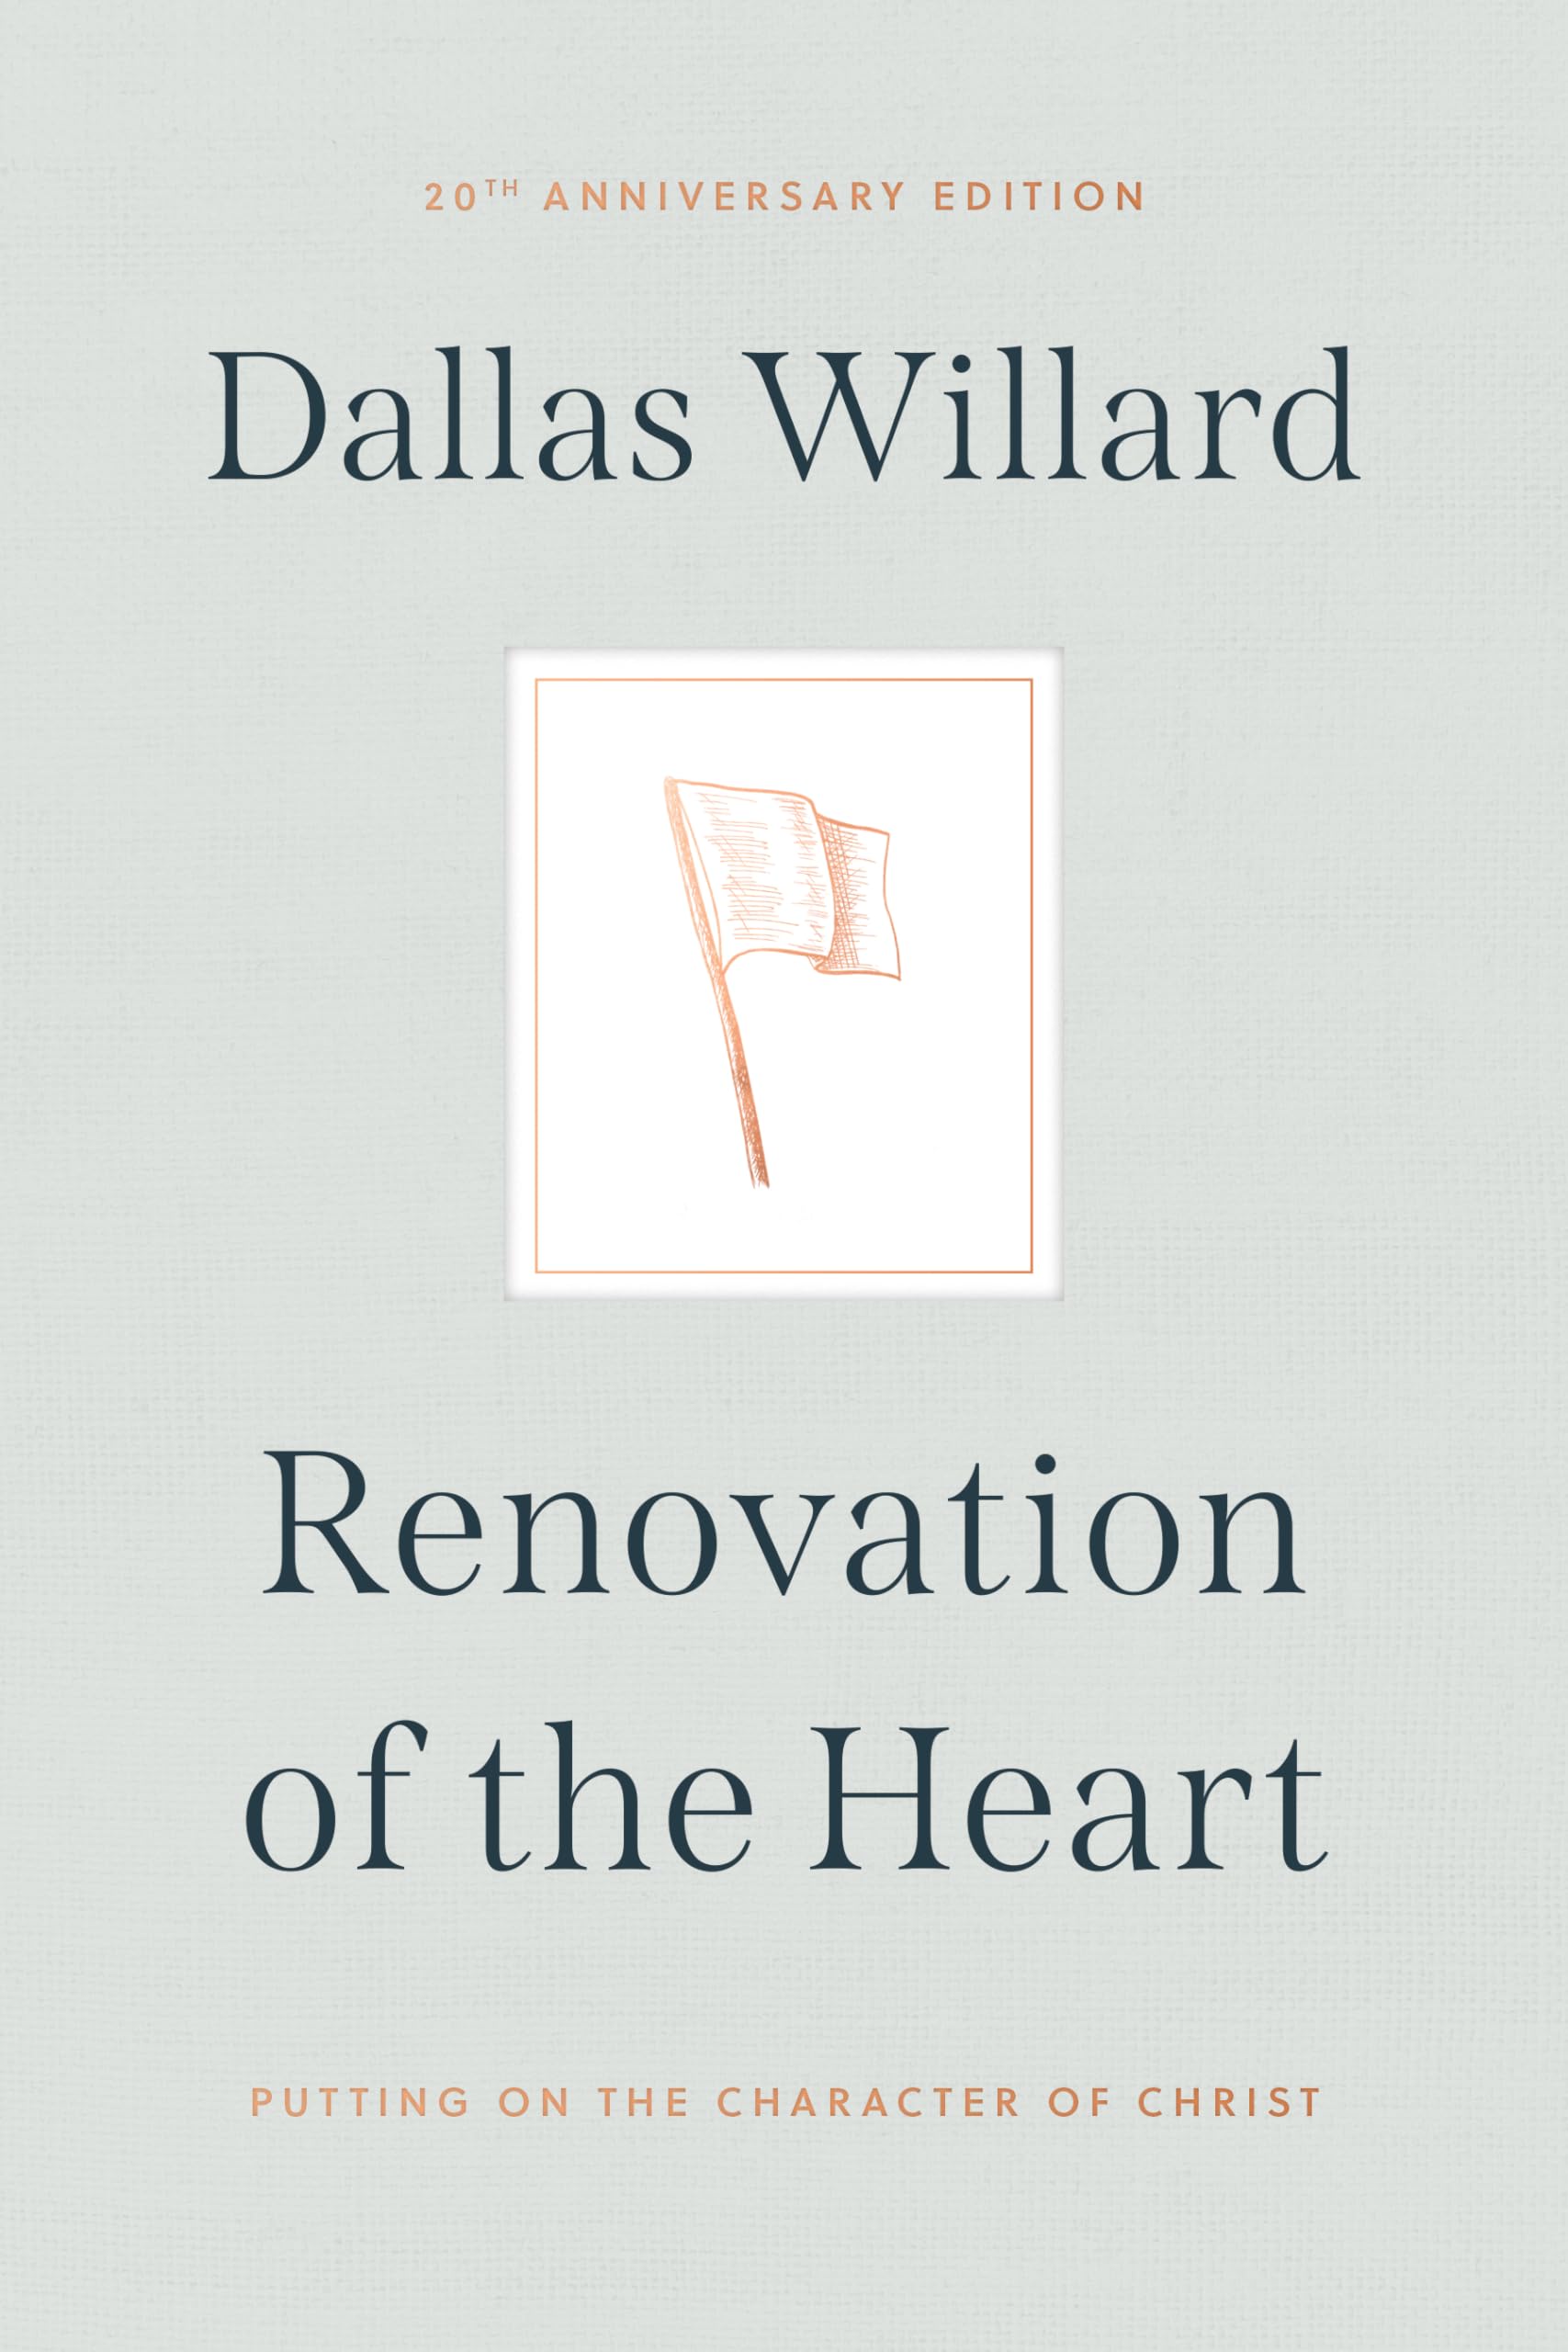 Renovation of the Heart: Putting on the Character of Christ - 20th Anniversary Edition by Willard, Dallas